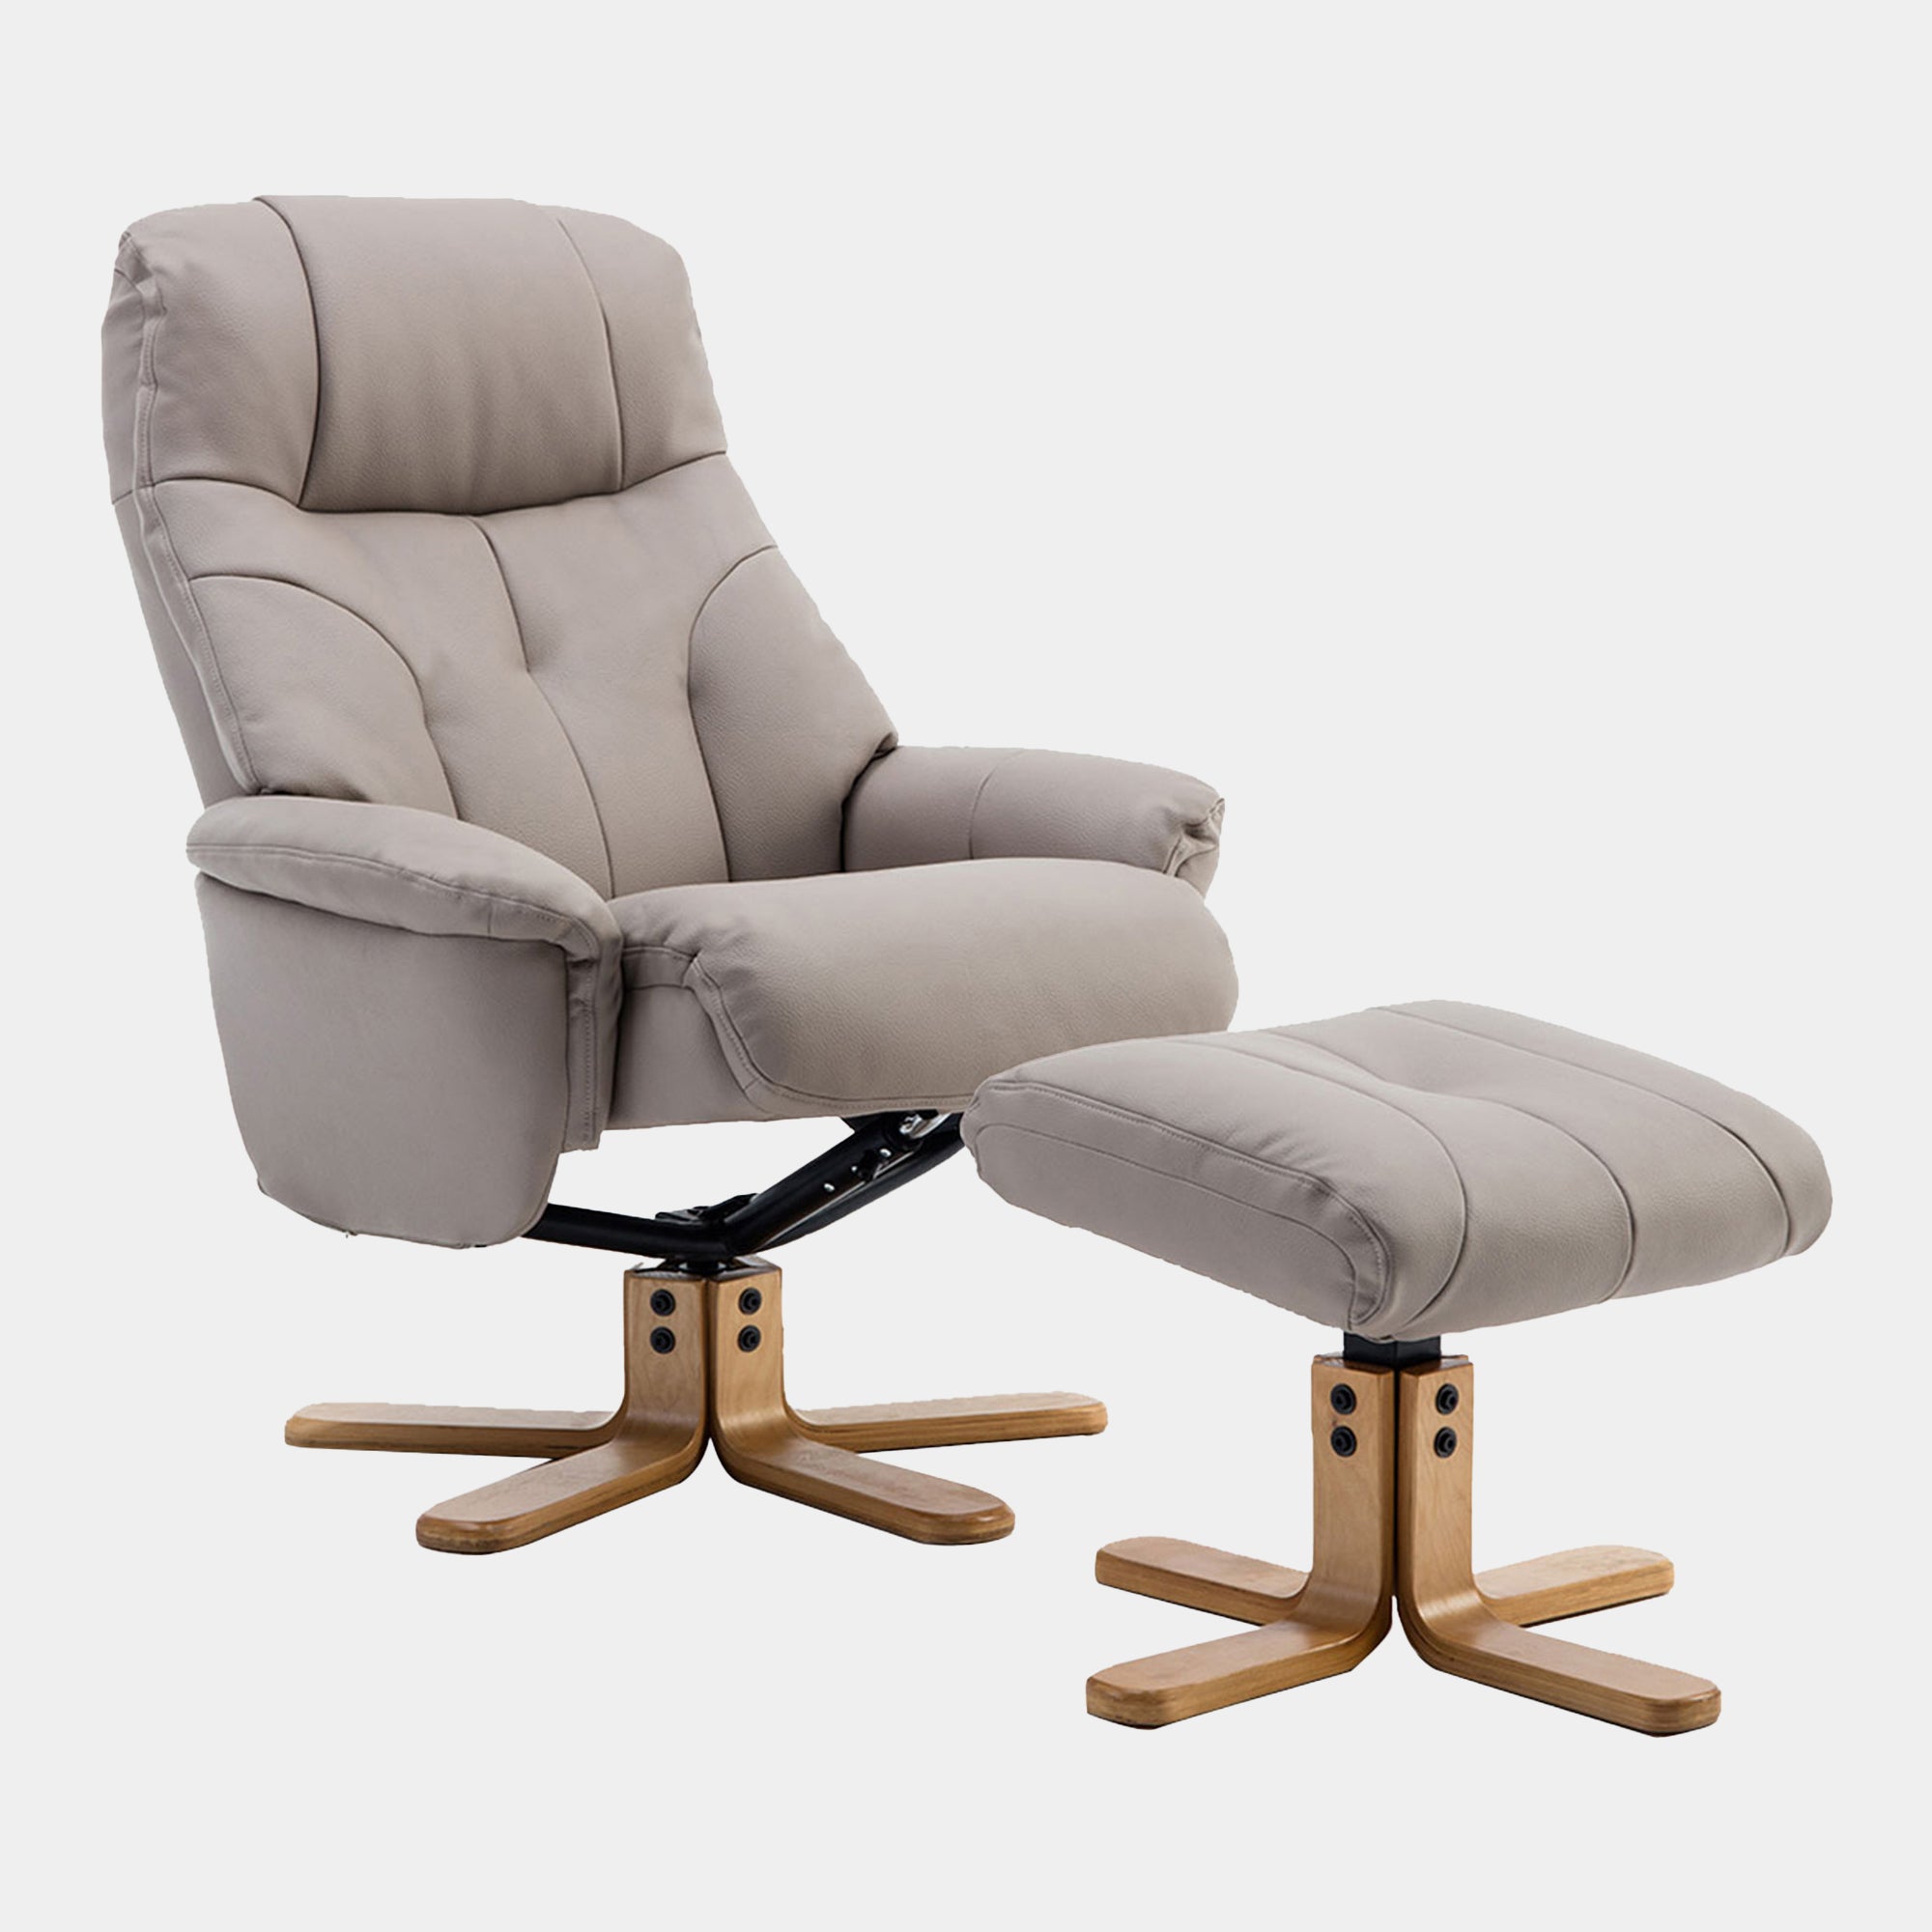 Swivel Chair And Stool In Plush Pebble Leather Effect (Assembly Required)